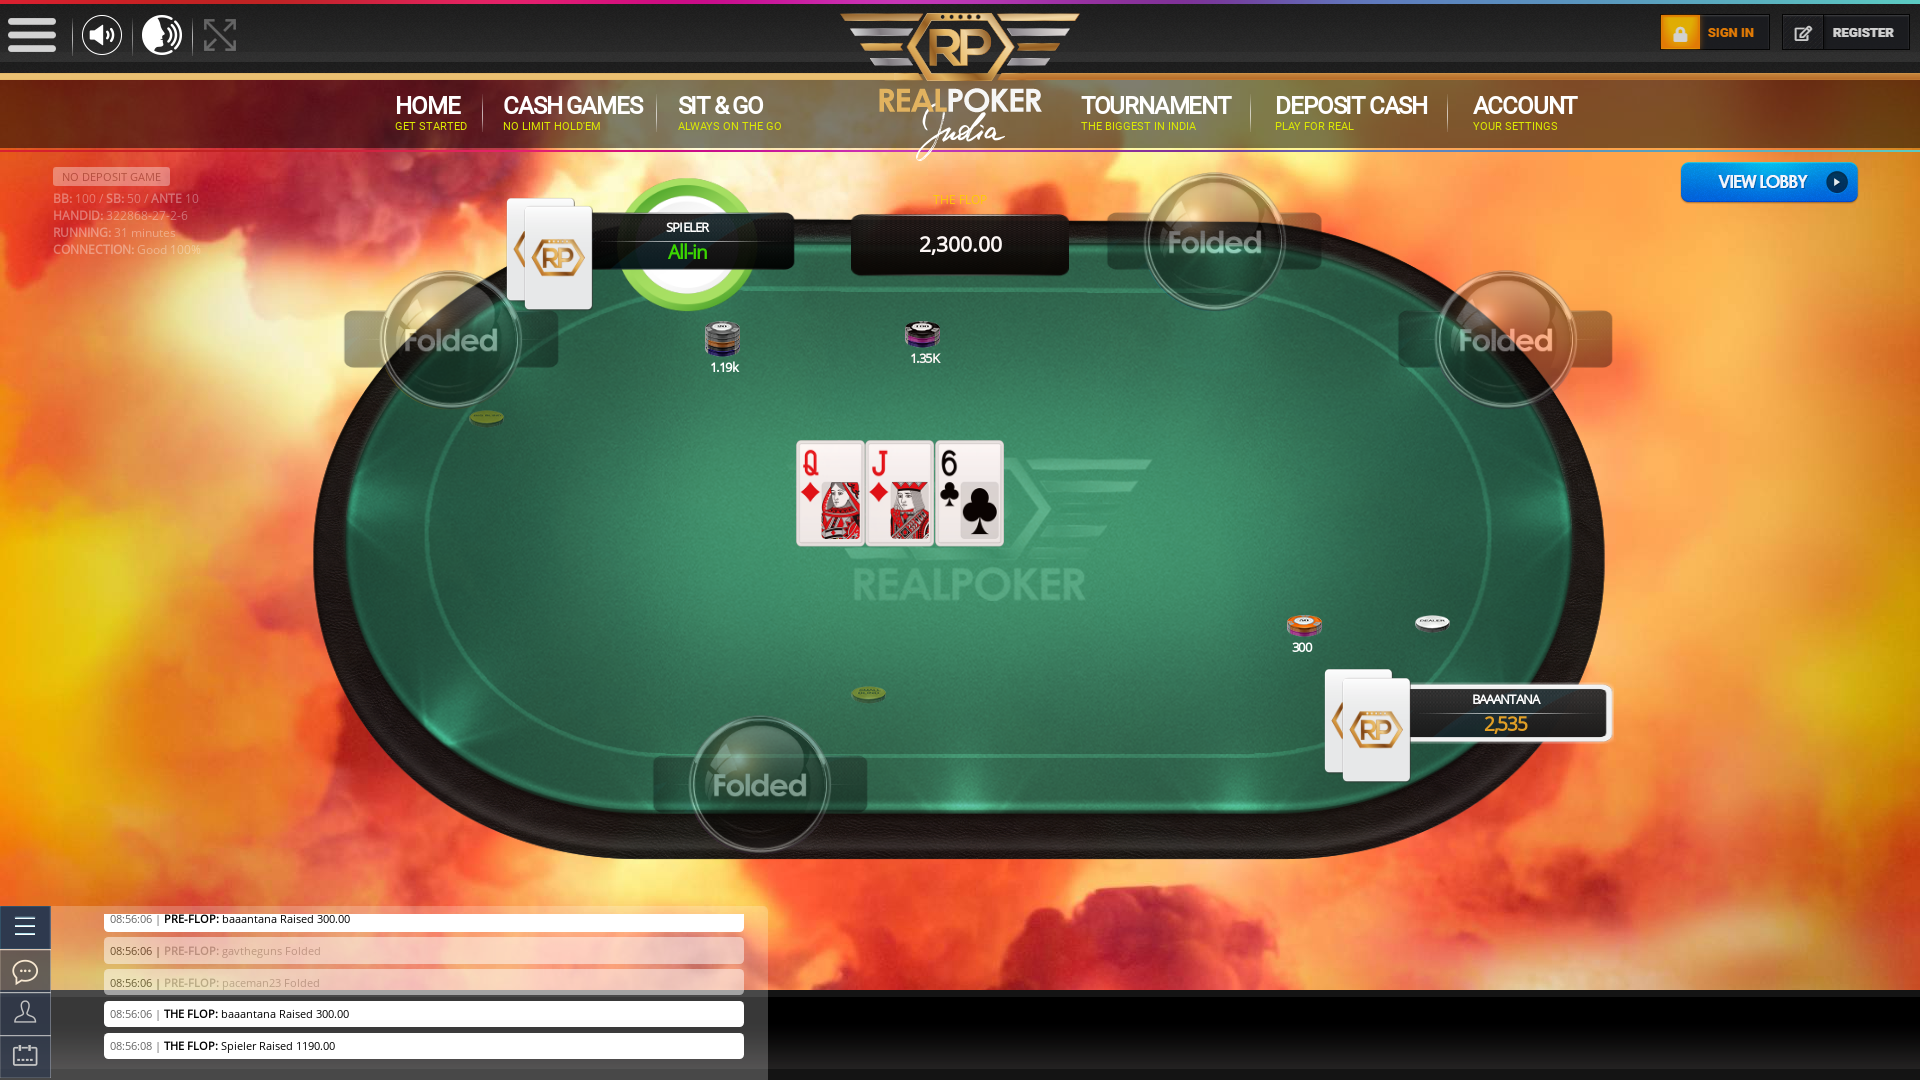 Indian online poker on a 10 player table in the 30th minute match up